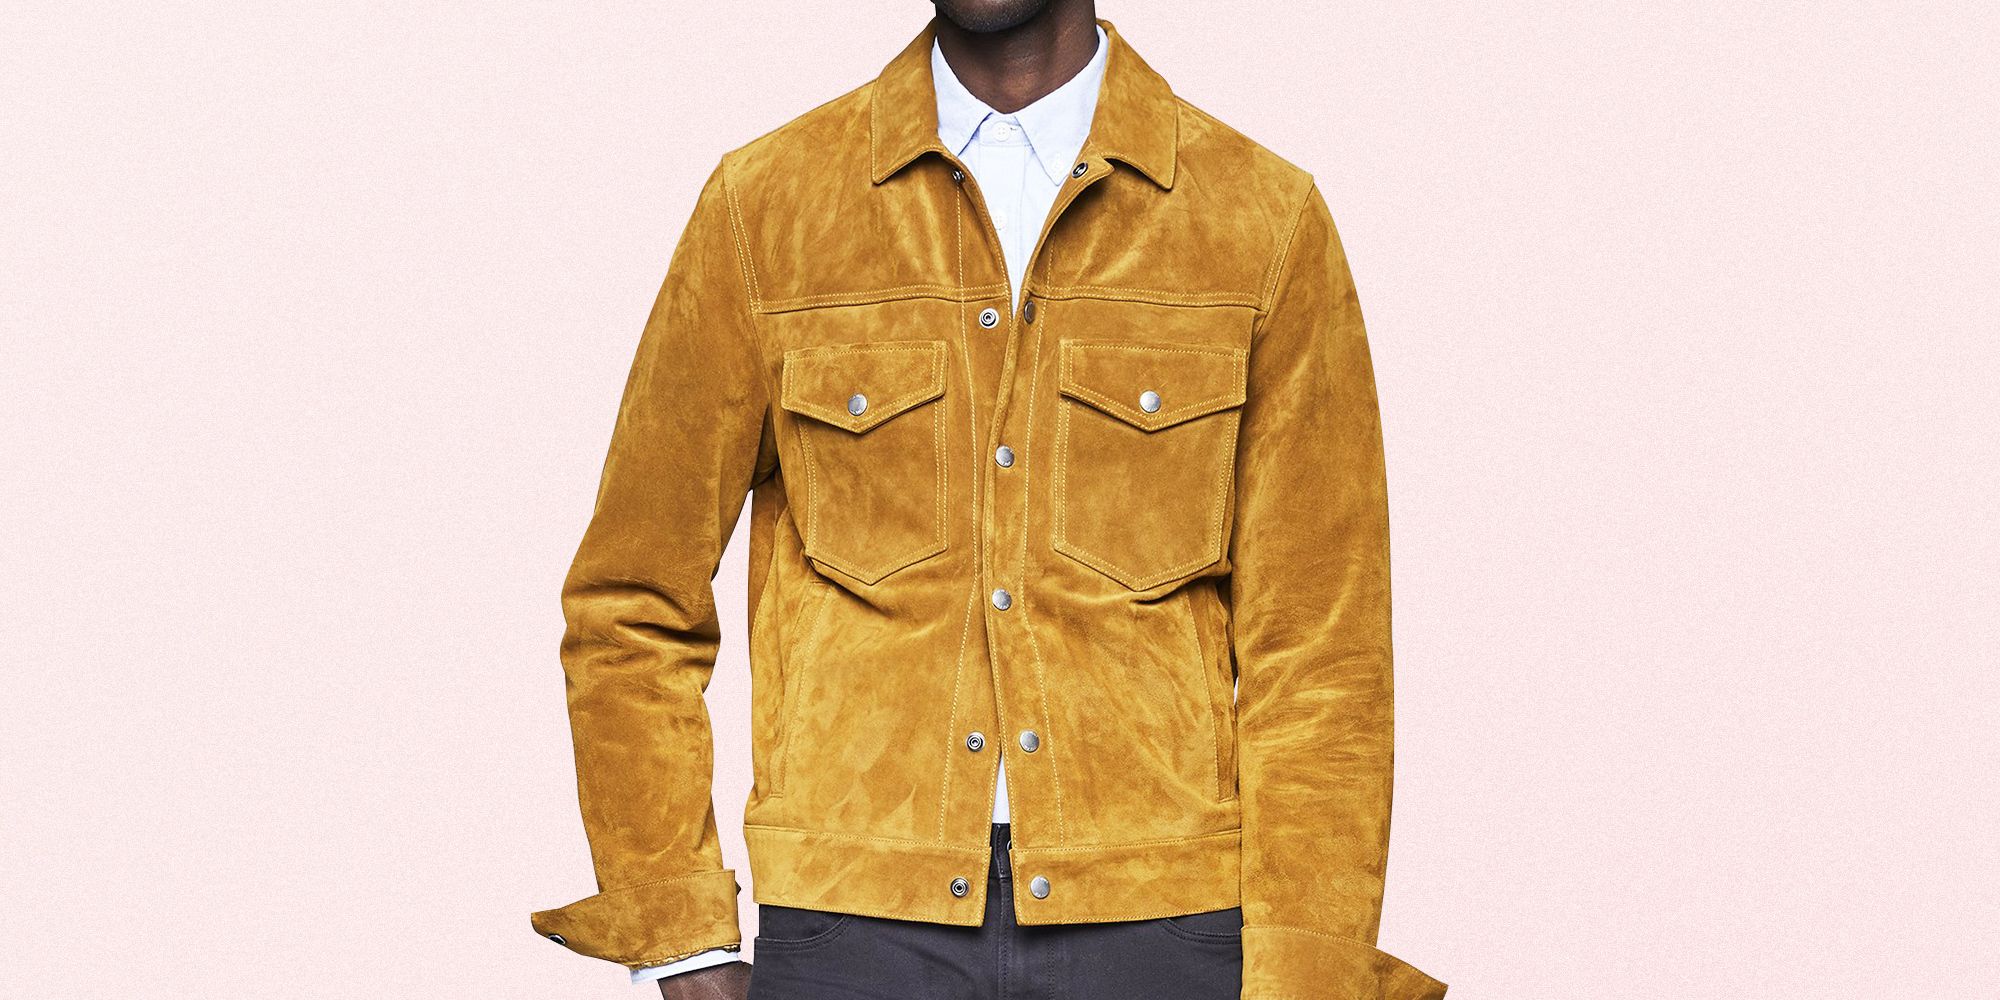 15 Suede Jackets for 2020 Top Suede Styles to Buy